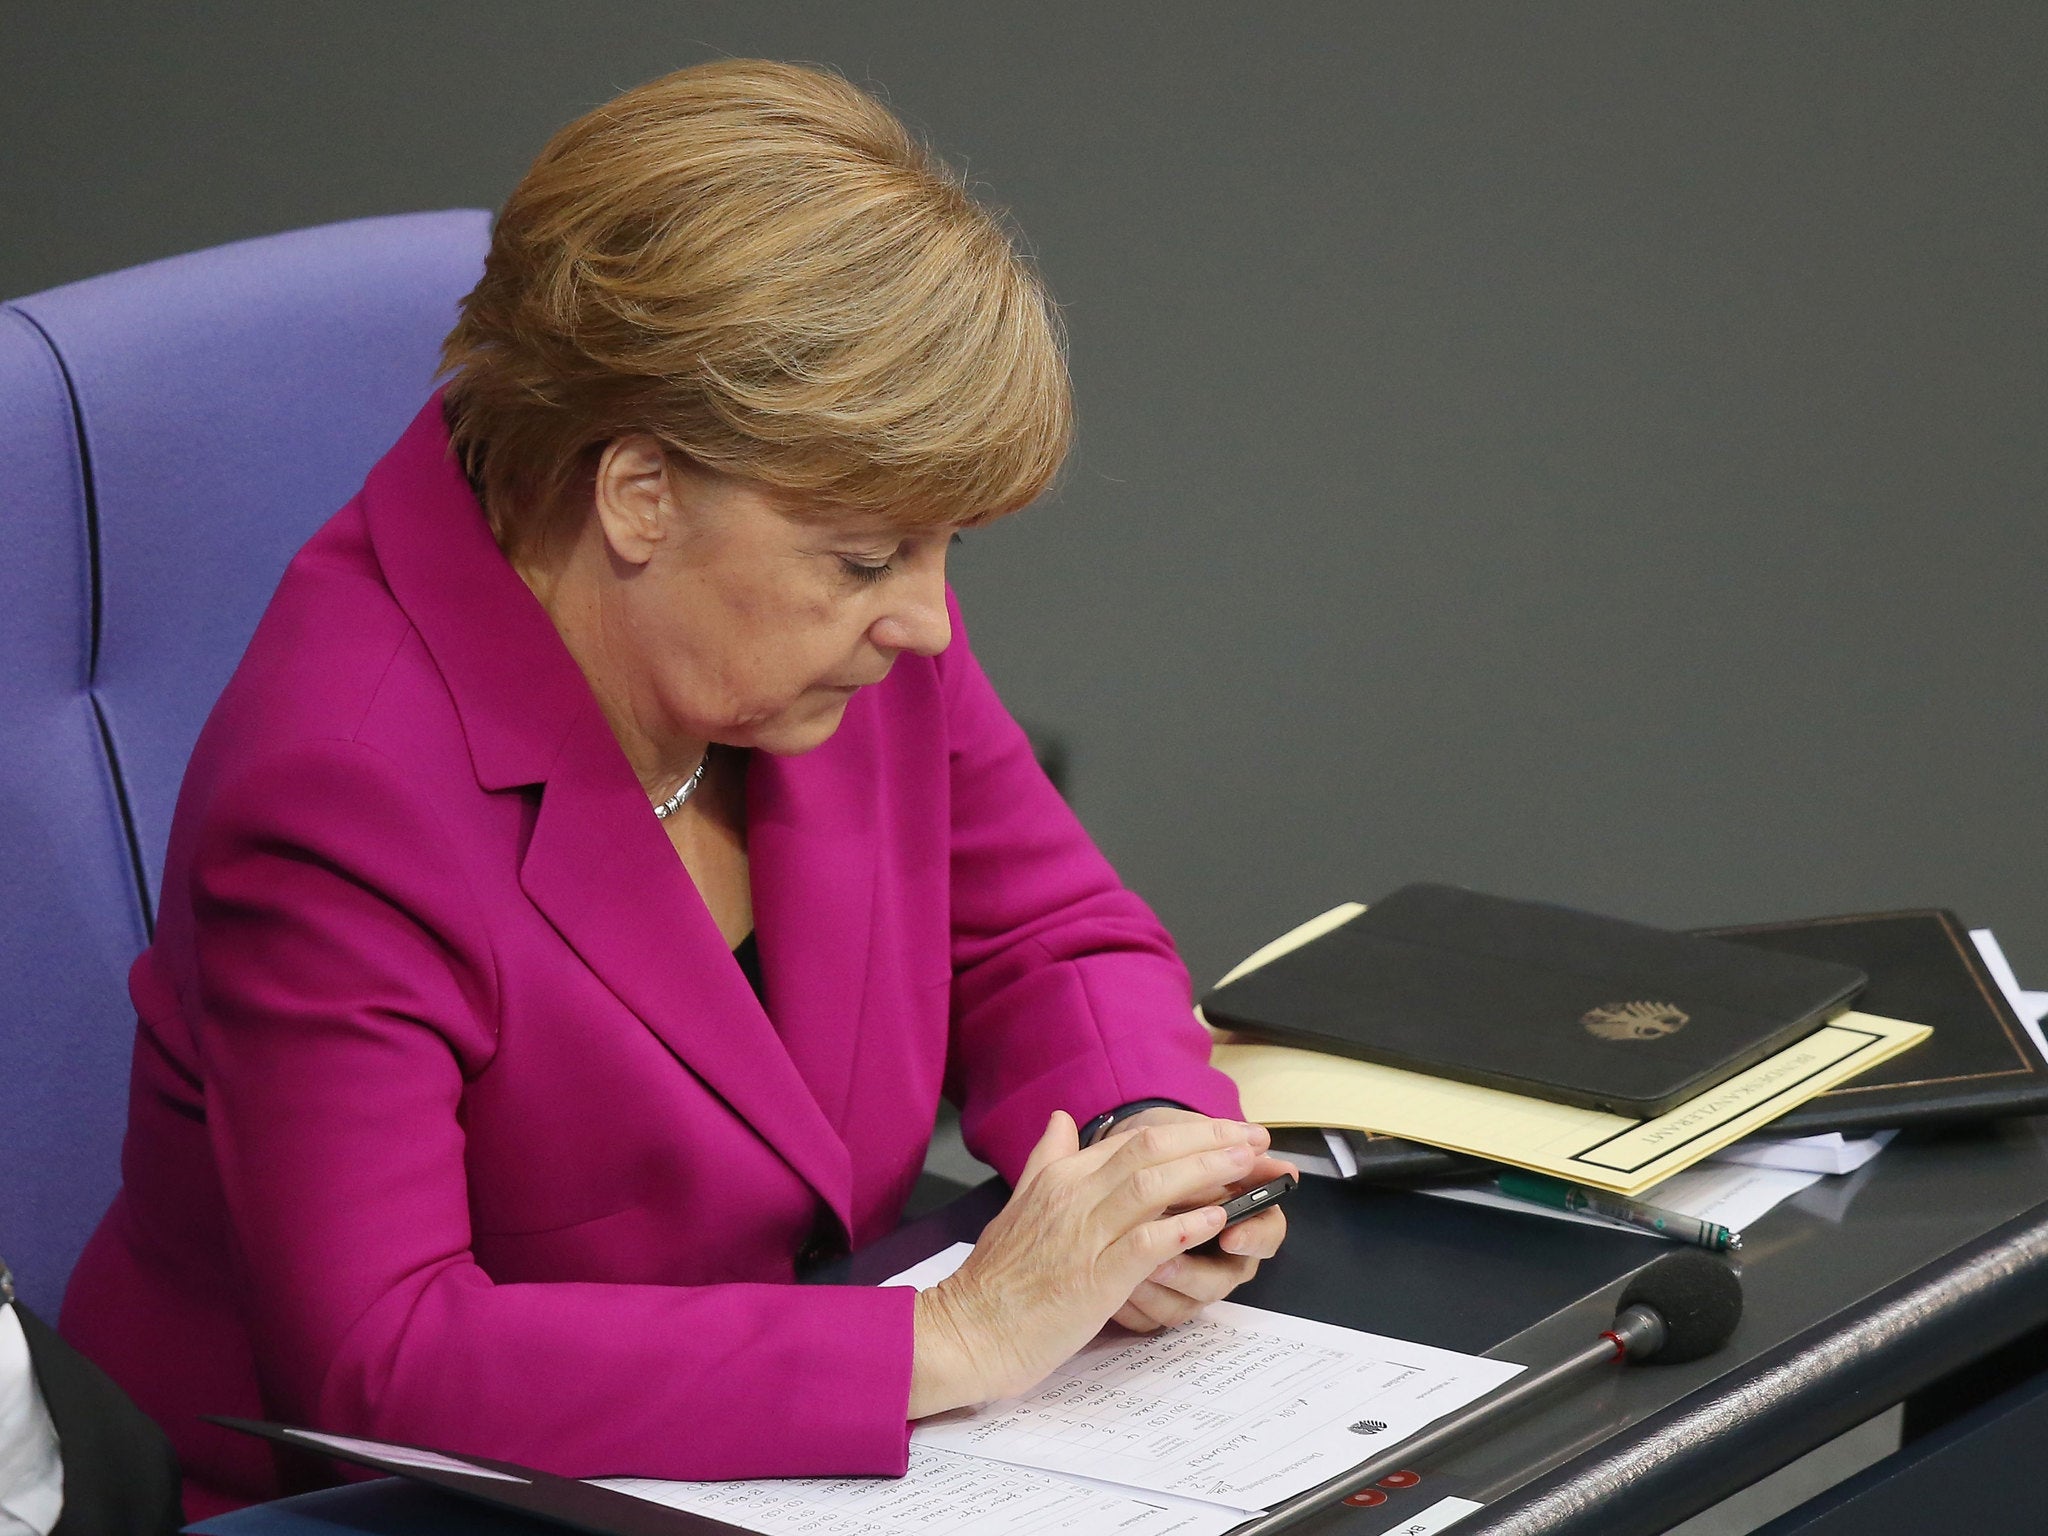 Angela Merkel has more than a million 'likes' on her Facebook page